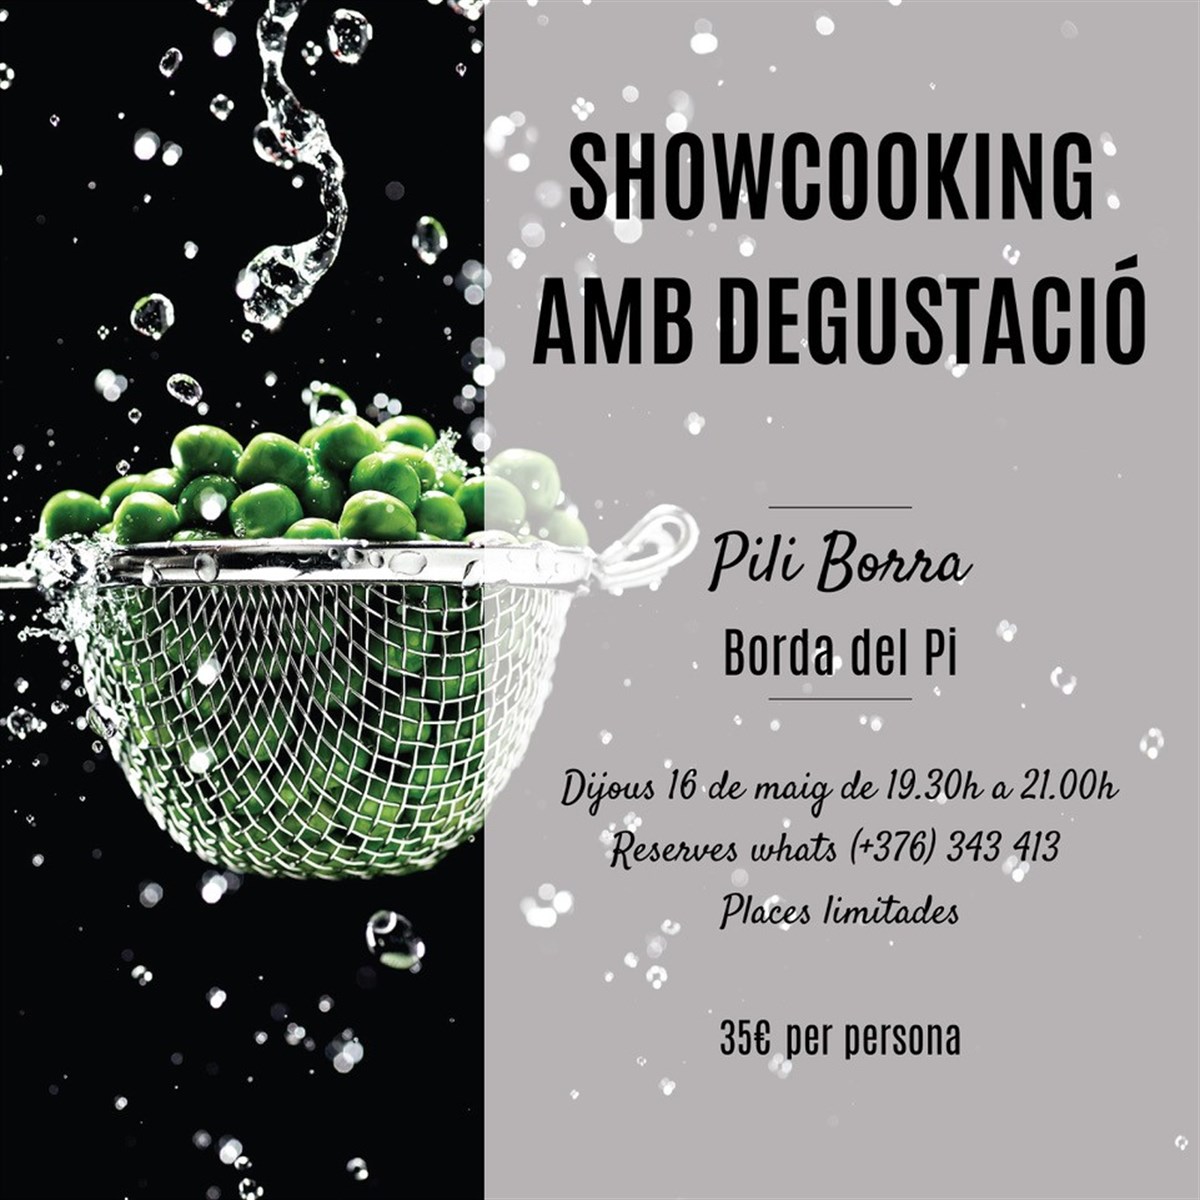 Showcooking with tasting